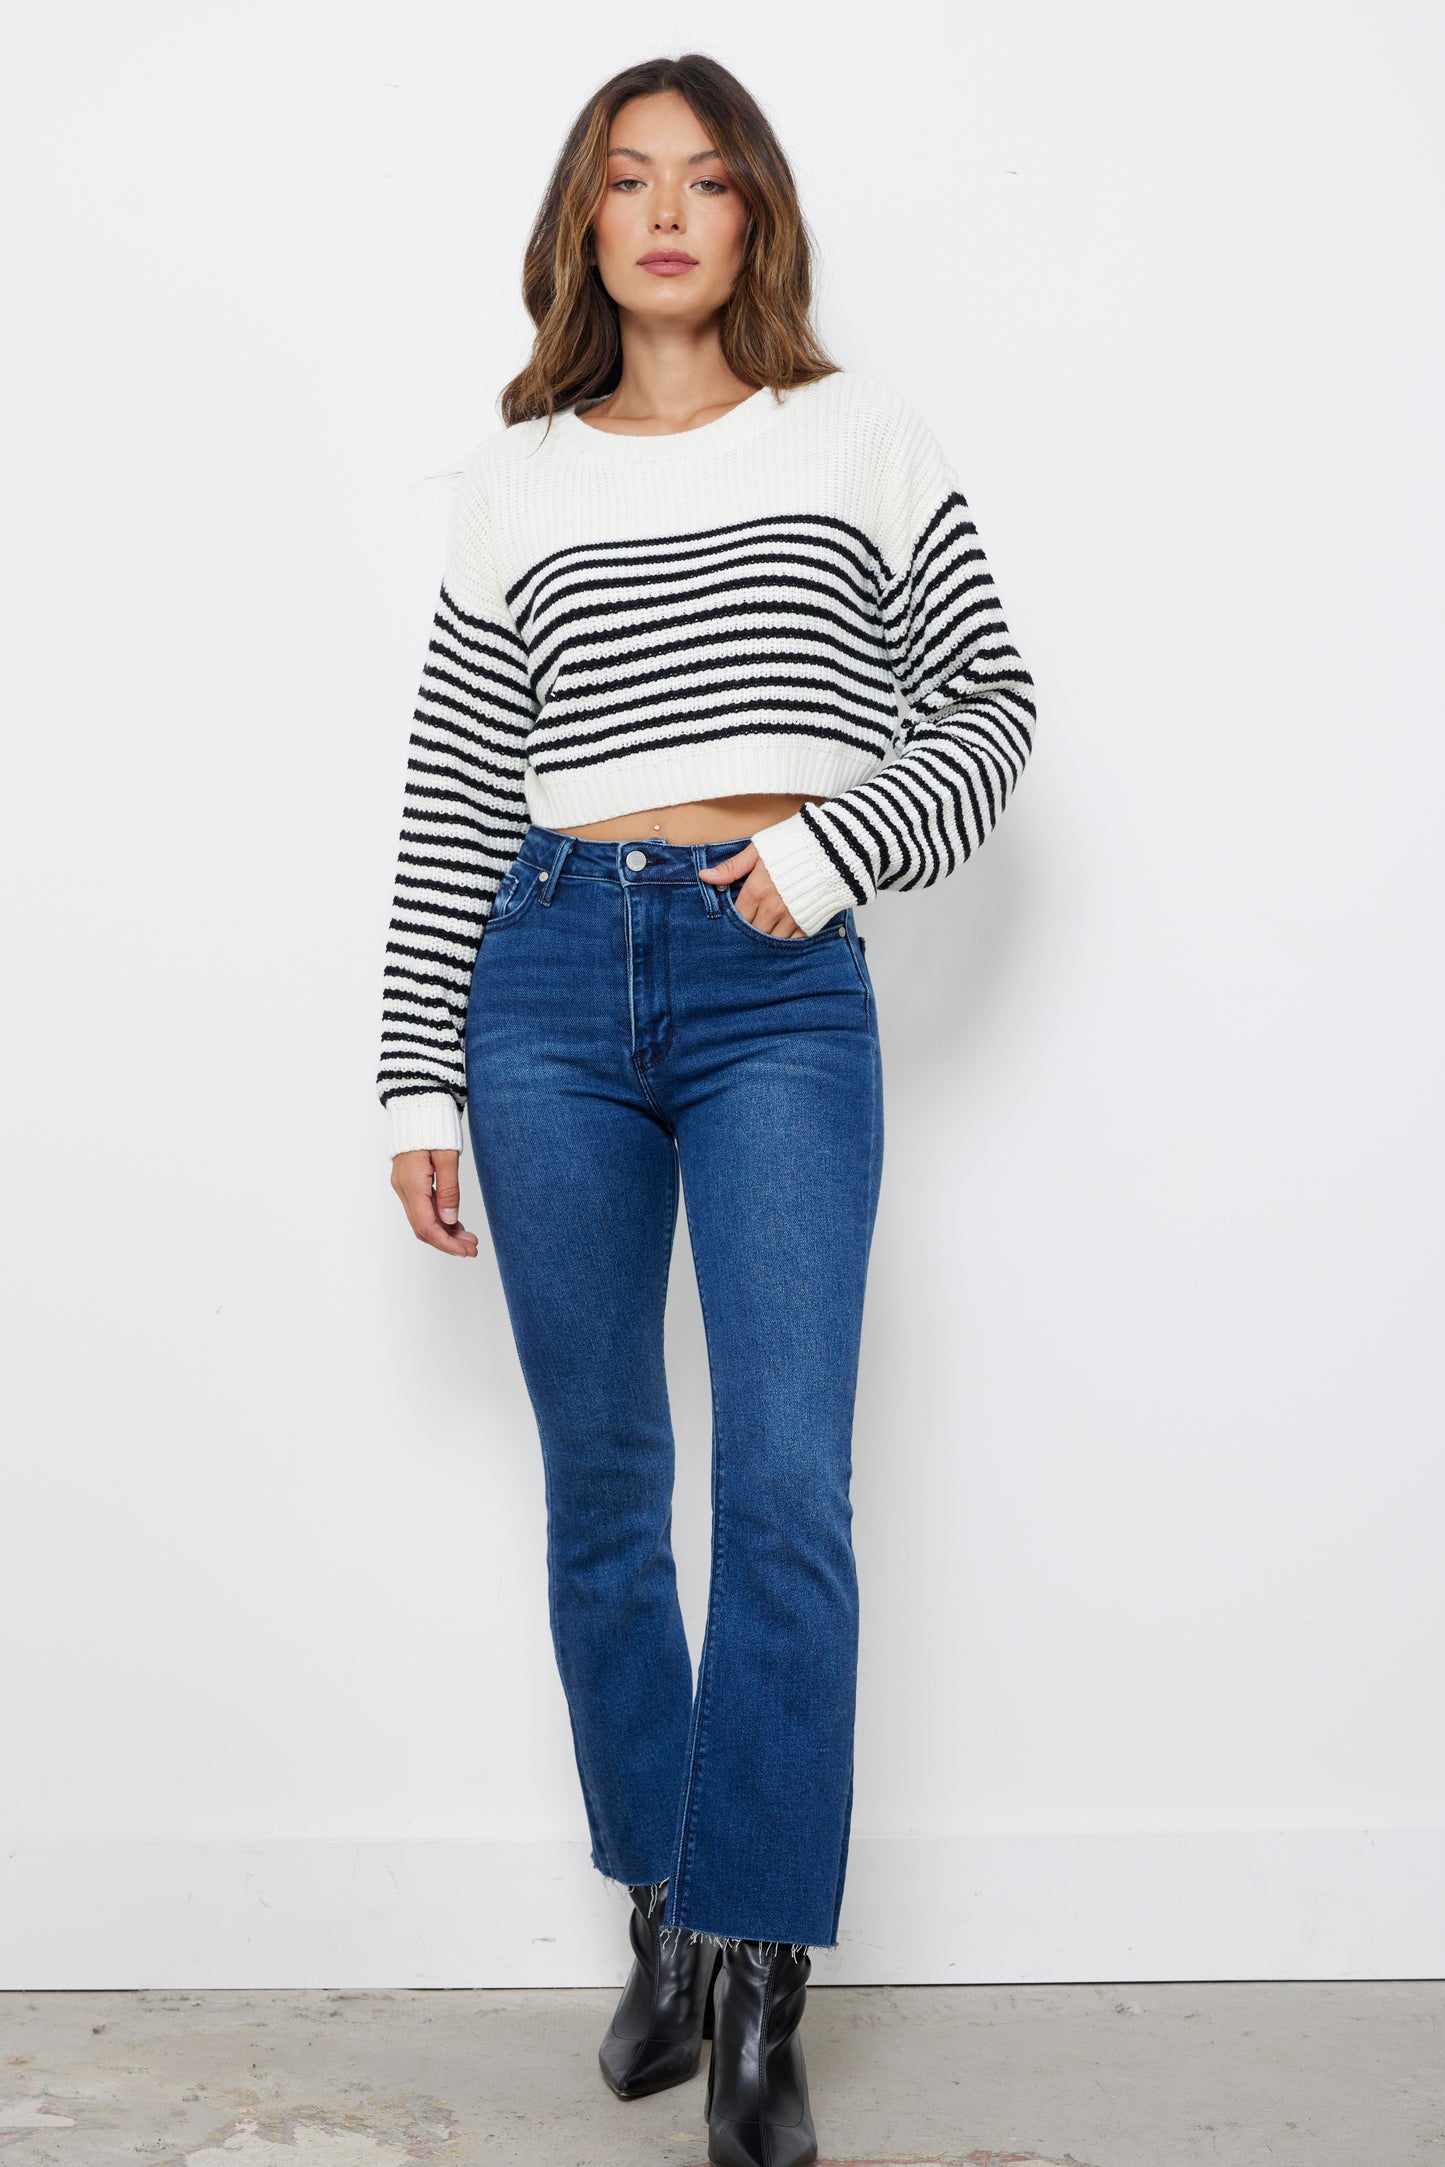 Nantucket Fall Off White Knit Top